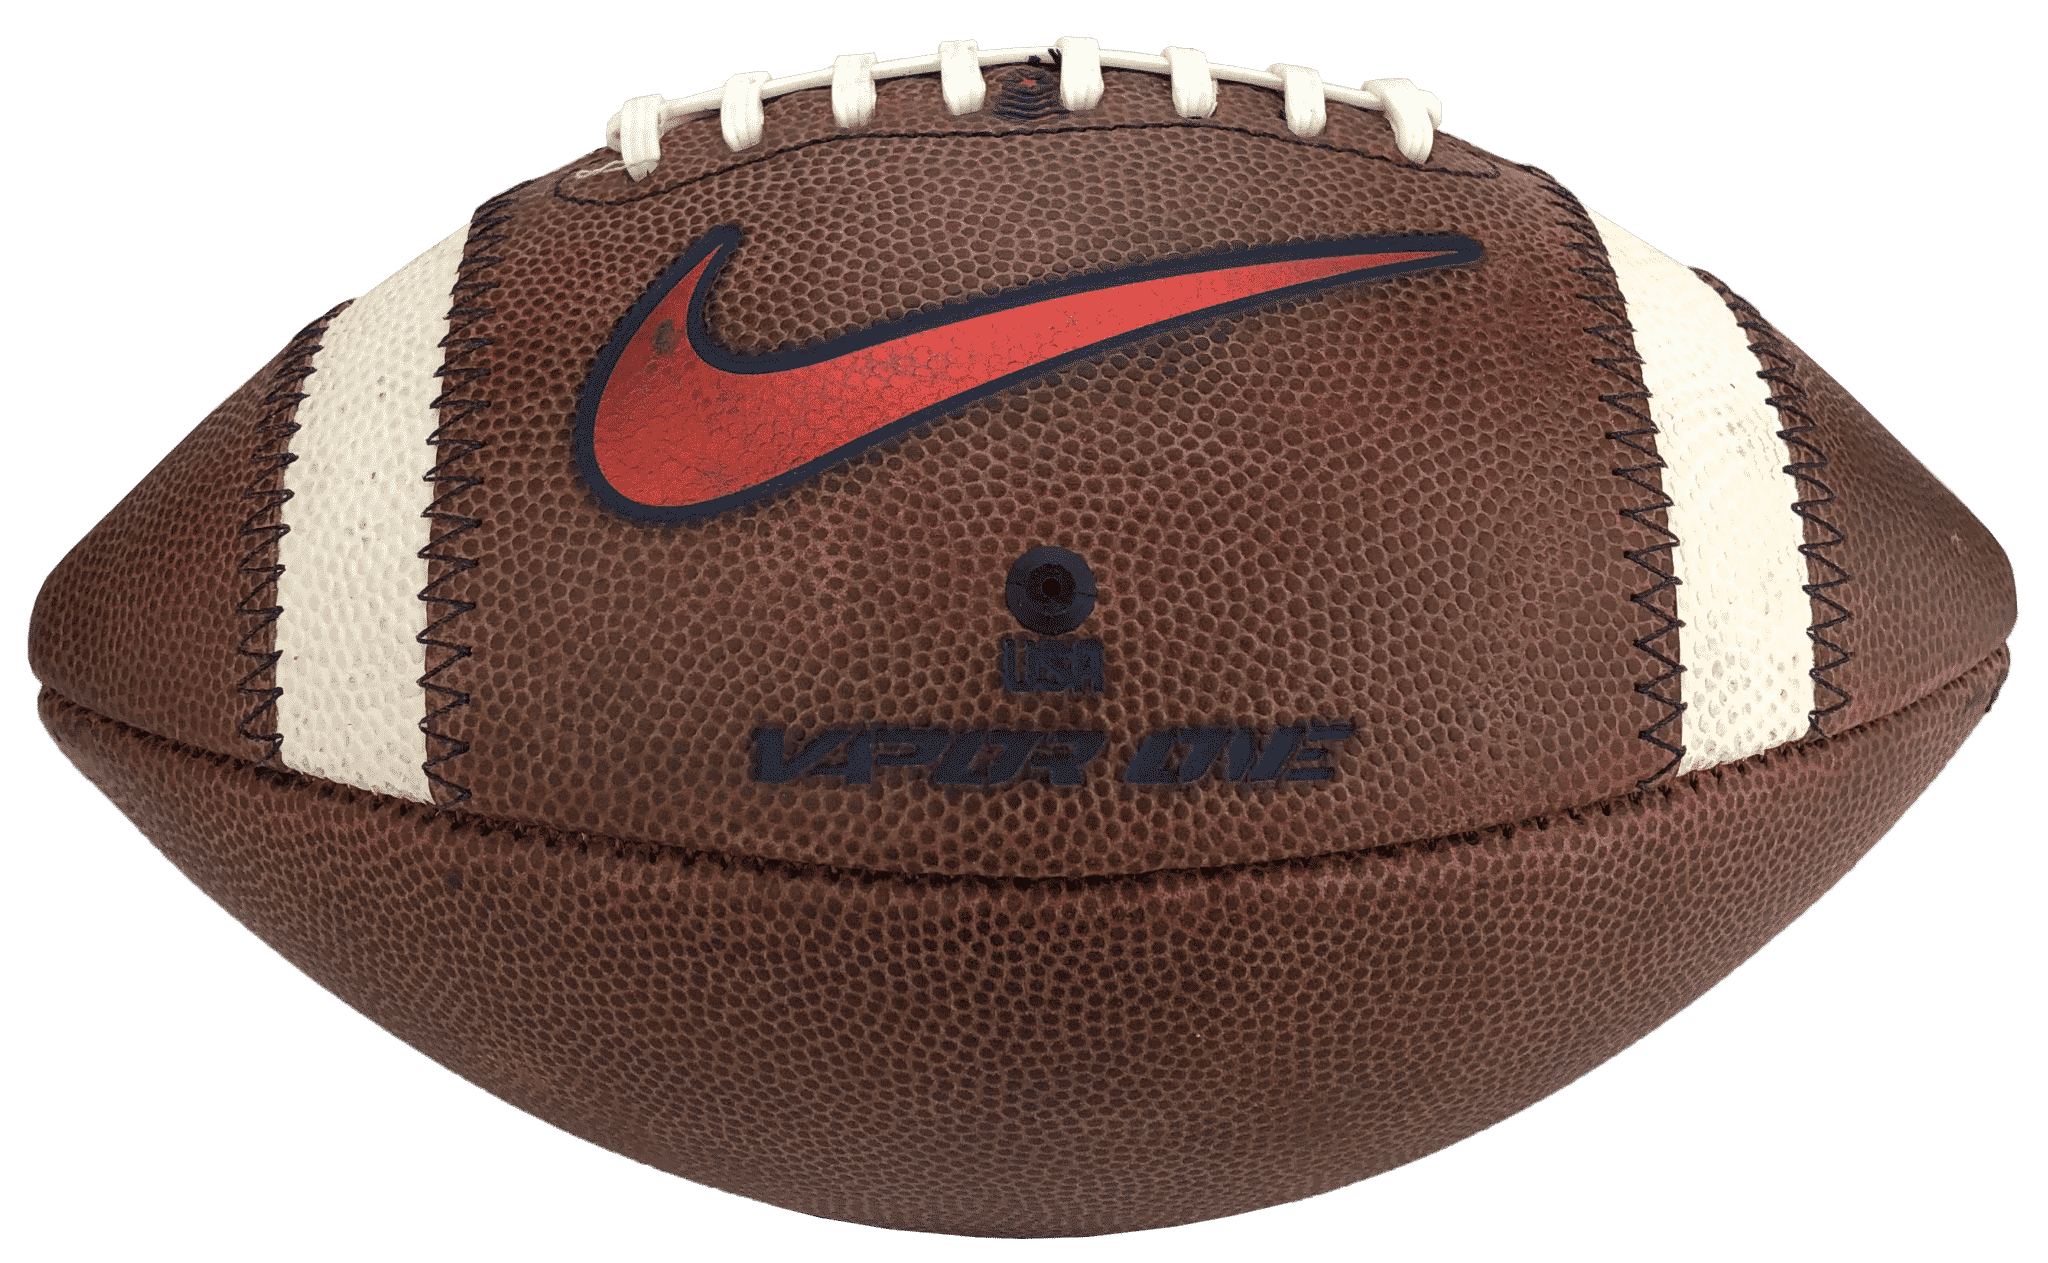 nike vapor one leather official football